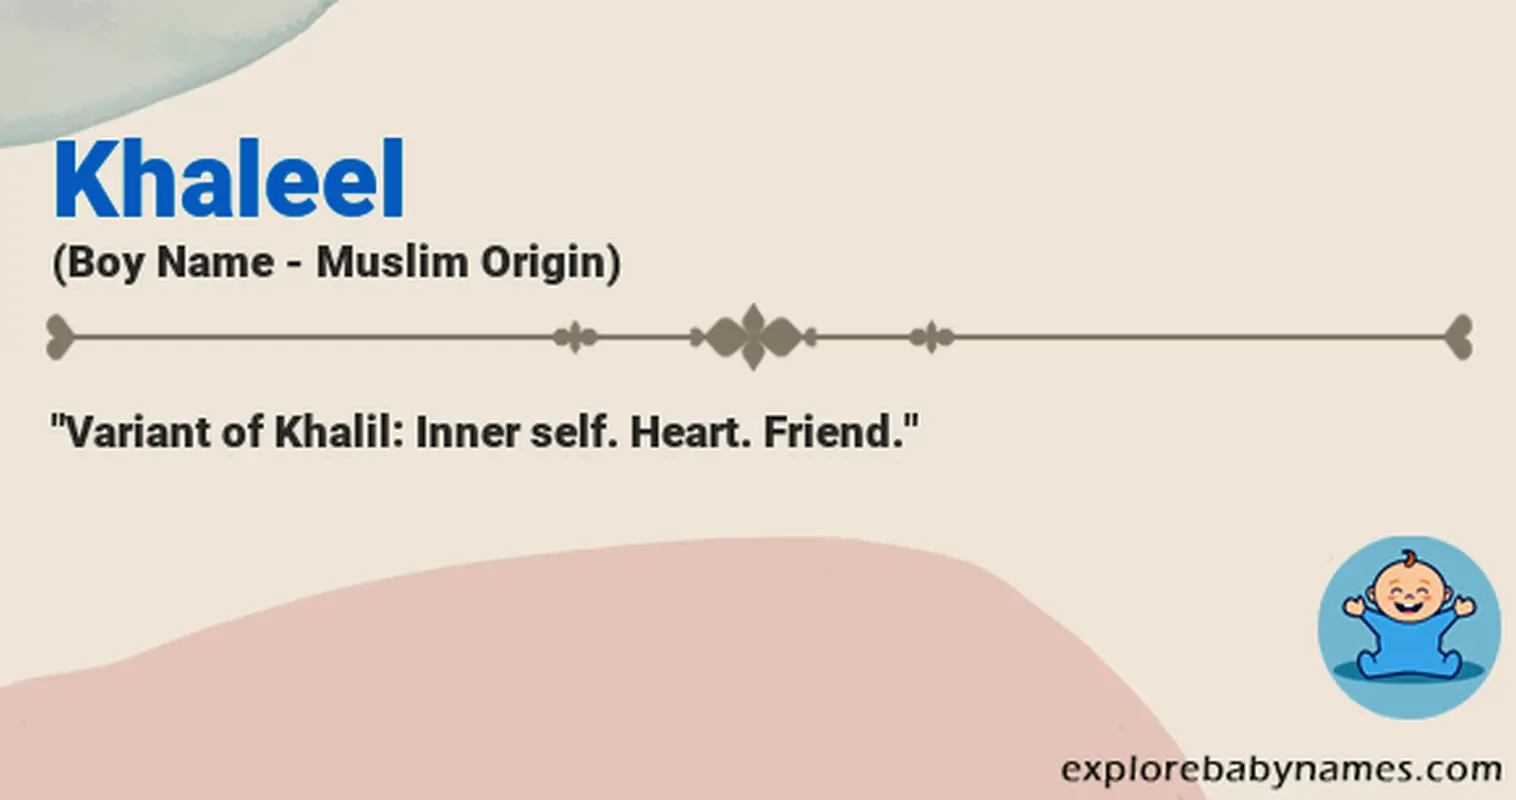 Meaning of Khaleel